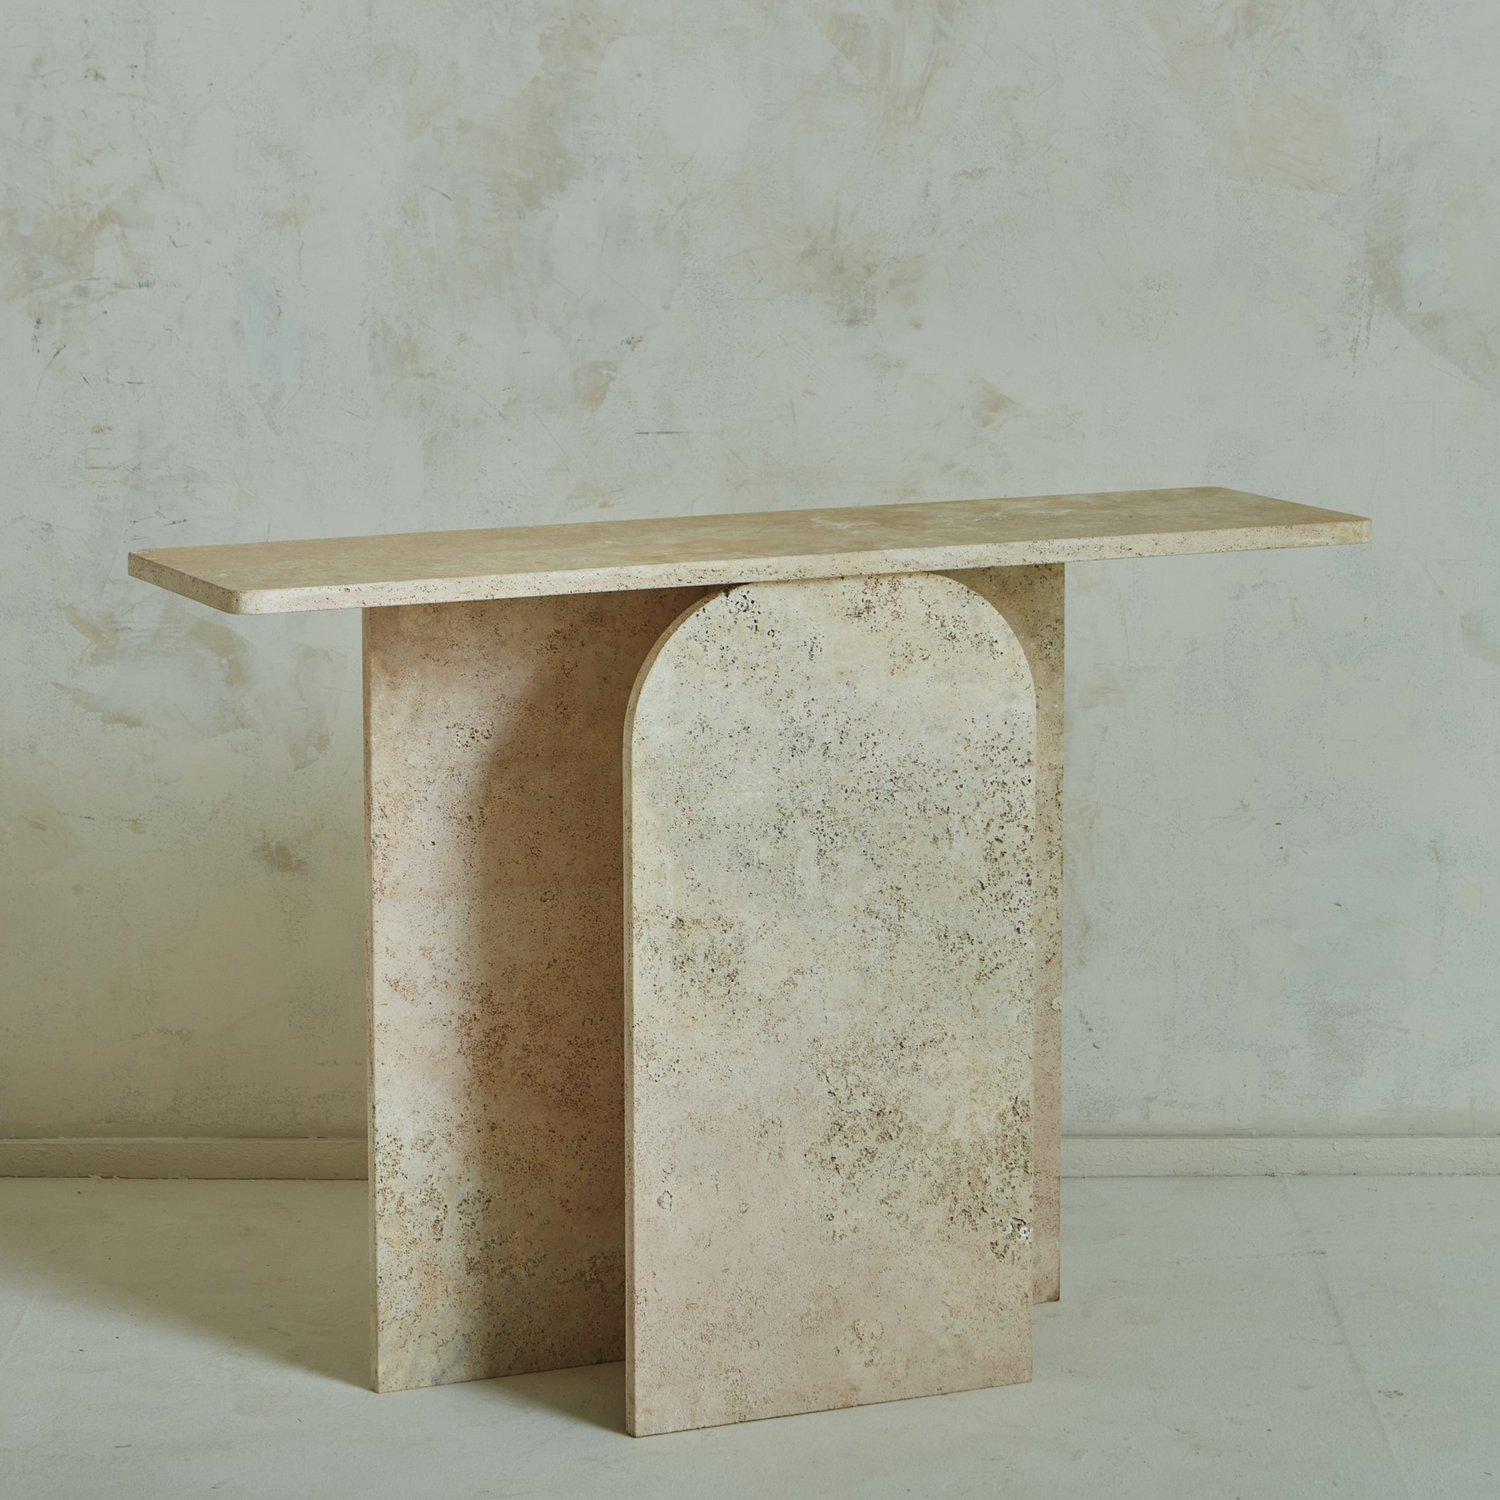 A custom console table designed in house by South Loop Loft. The Arc console was constructed with a gorgeous peachy unfilled travertine. It features a rectangular tabletop and a beautiful arched profile.

This table is available as a custom order